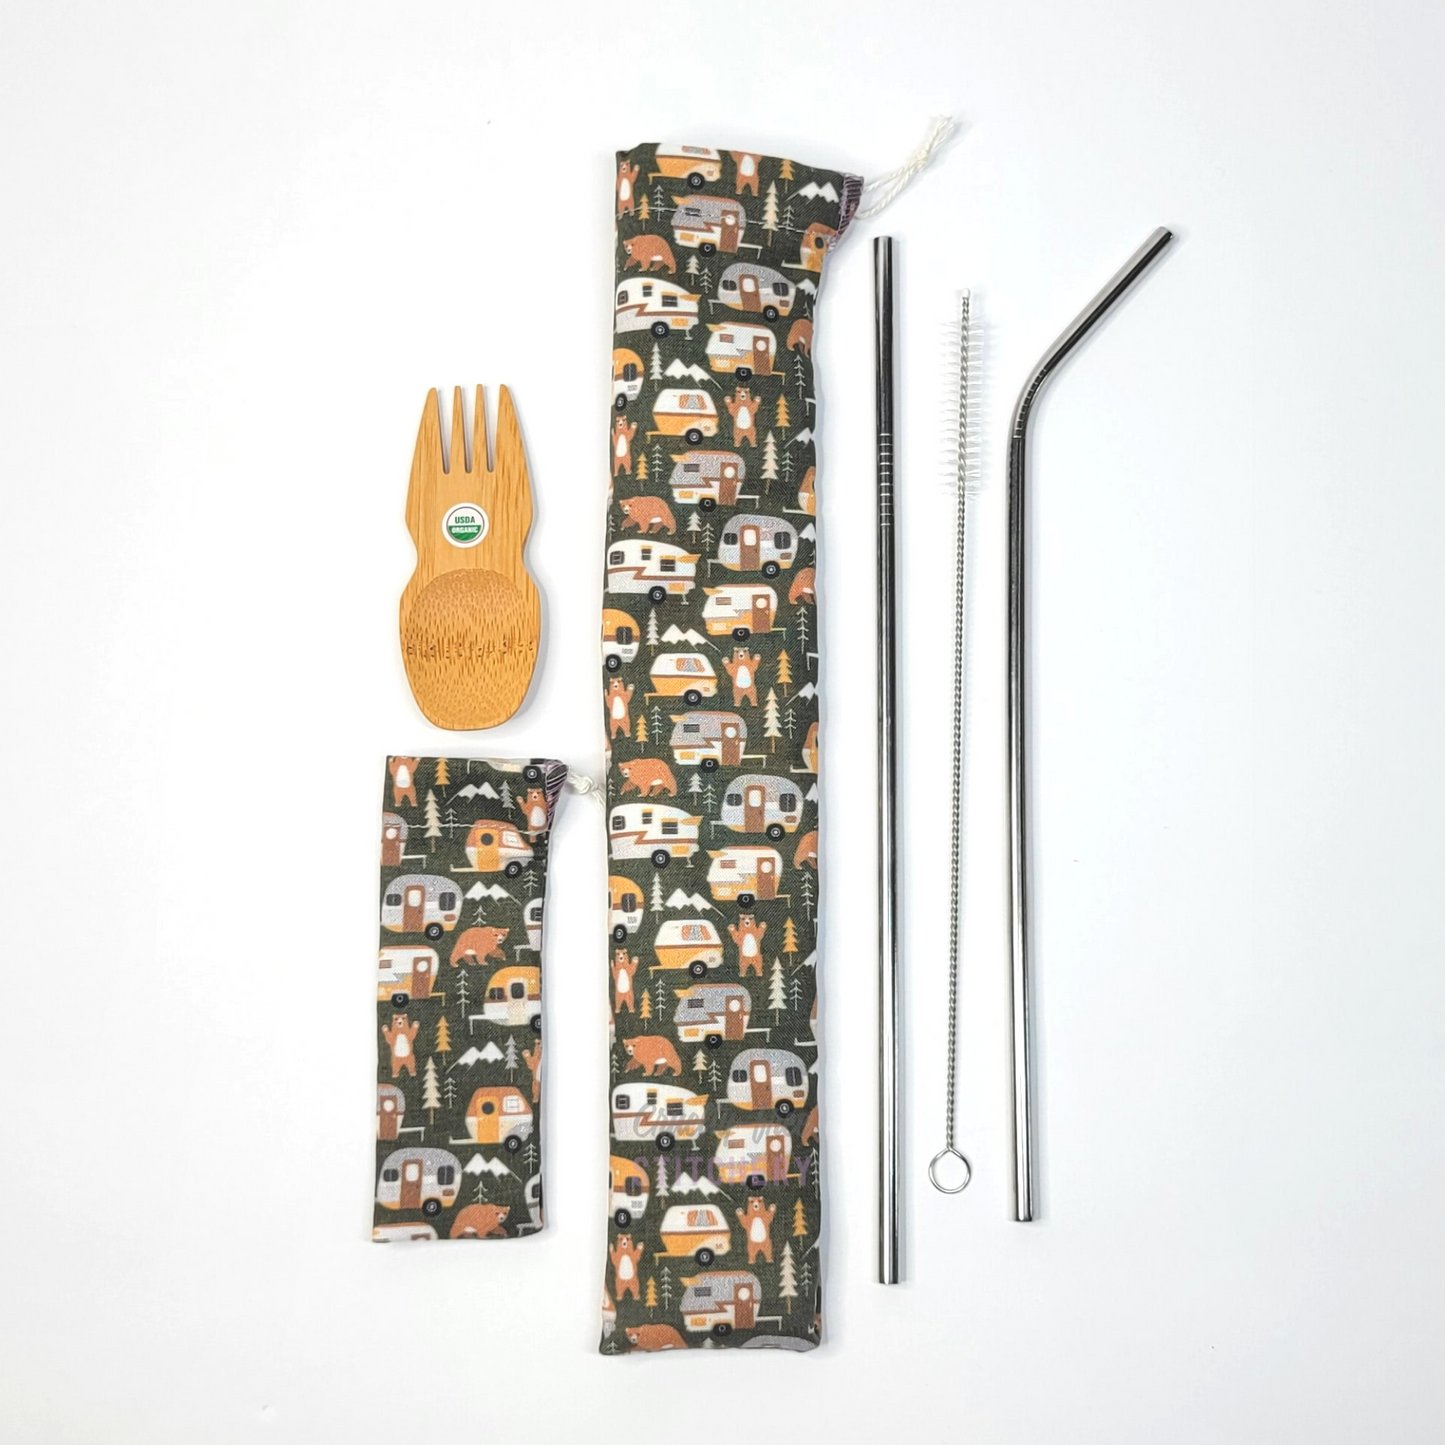 All contents of this bundle. A bamboo spork, campers print spork pouch, campers print straw pouch, and stainless steel straw set.